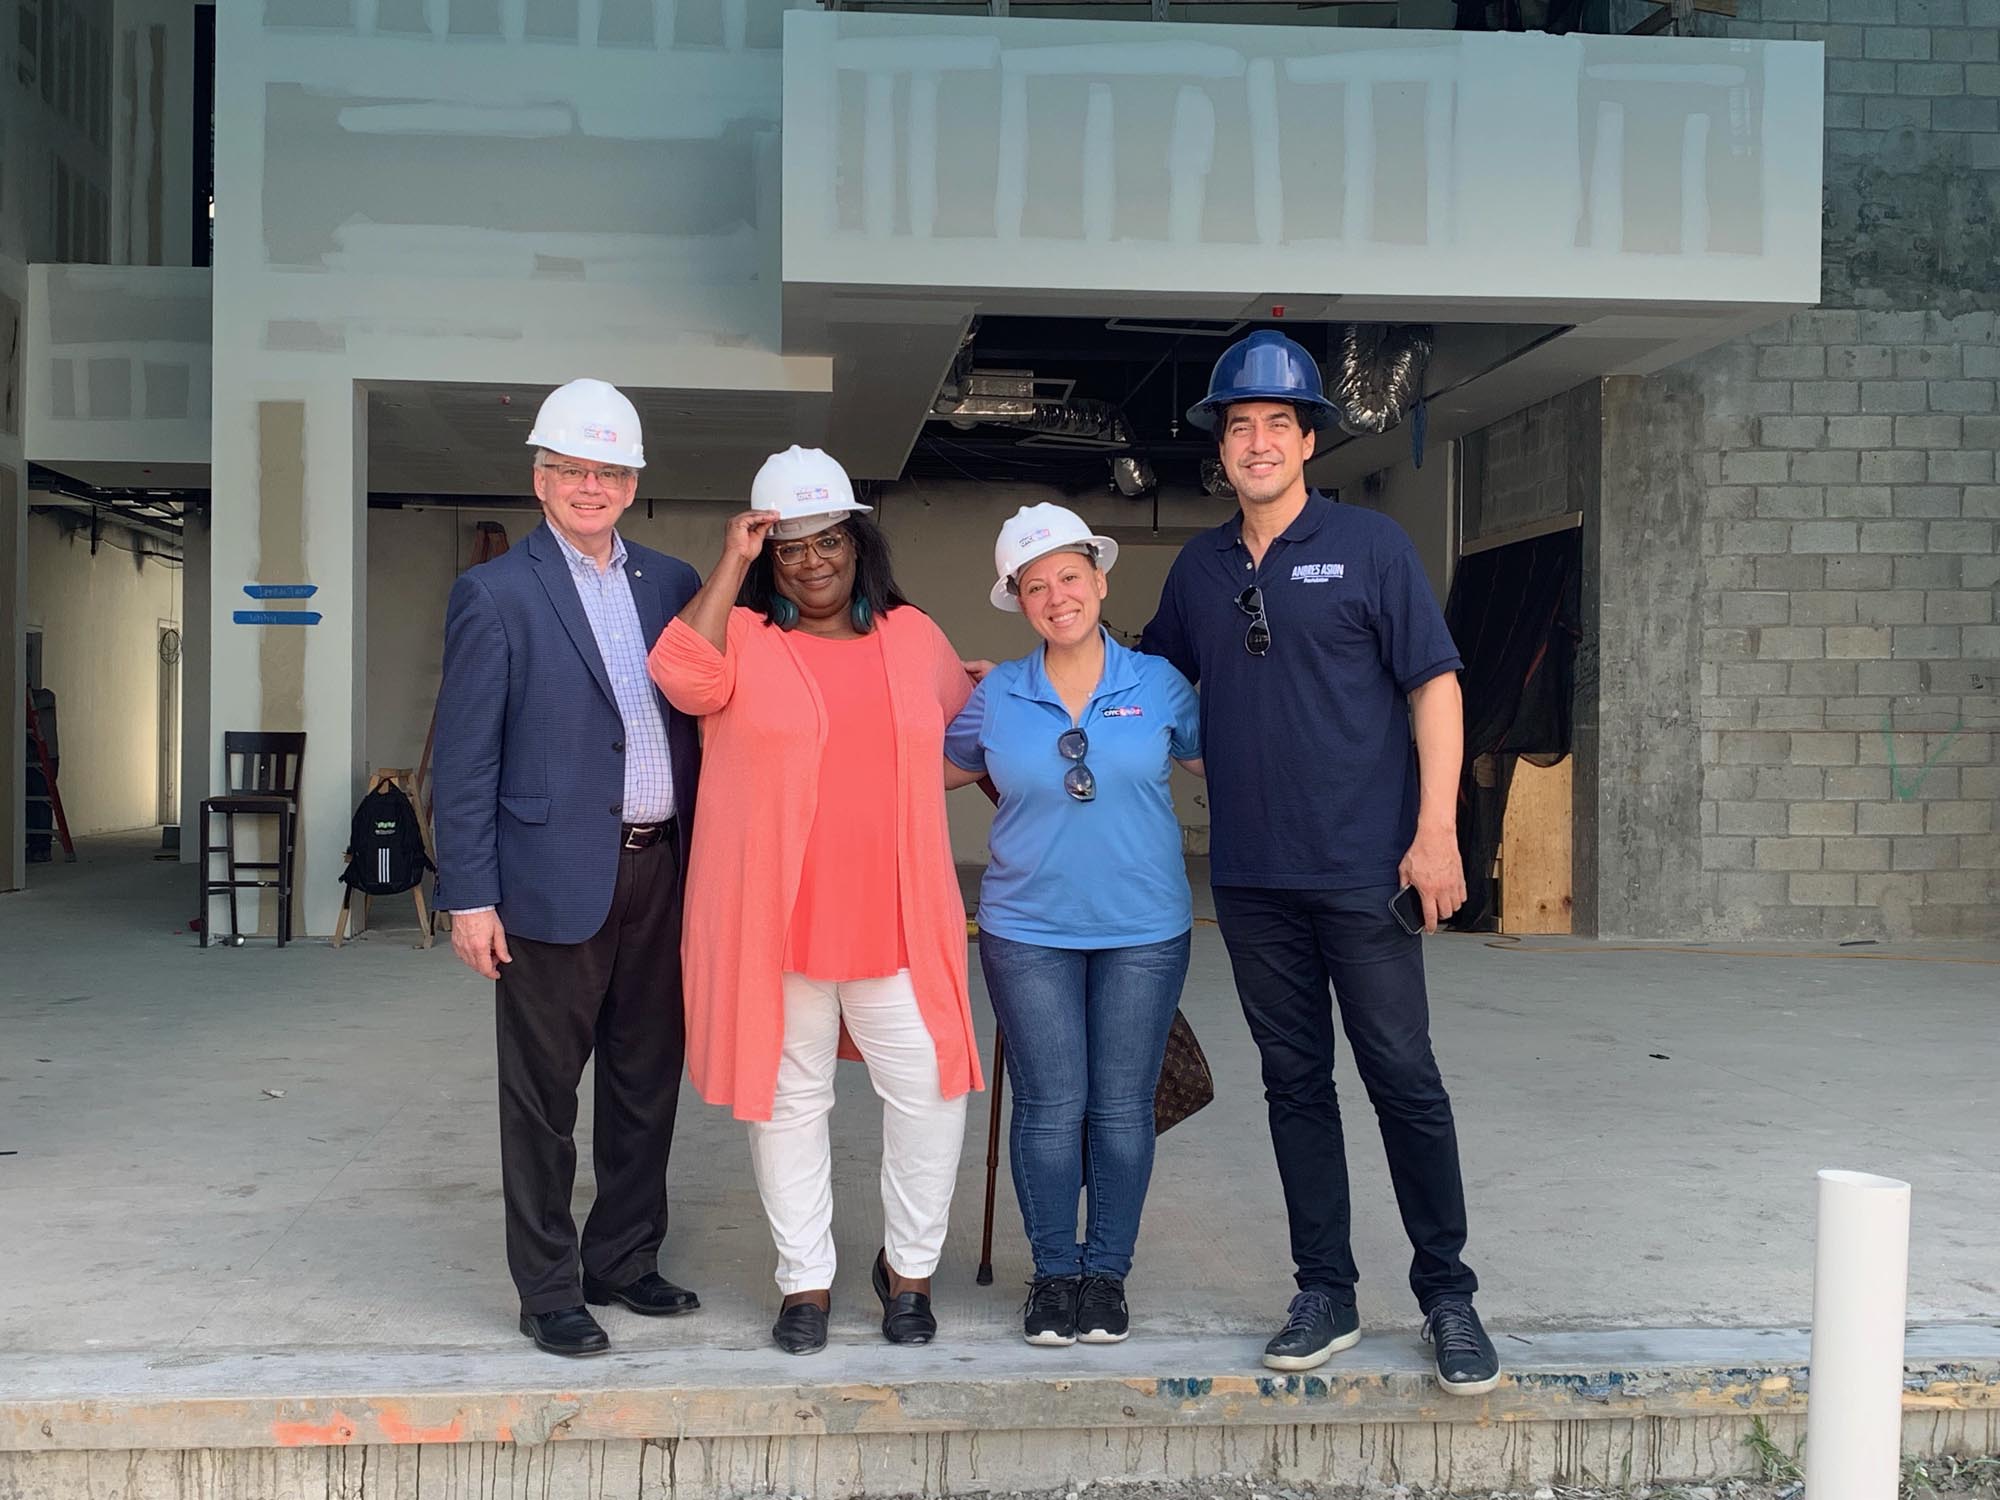 Staff from Miami-Dade County’s Office of the Mayor Daniella Levine Cava pose for a photo in front of the new OYC Center construction site.